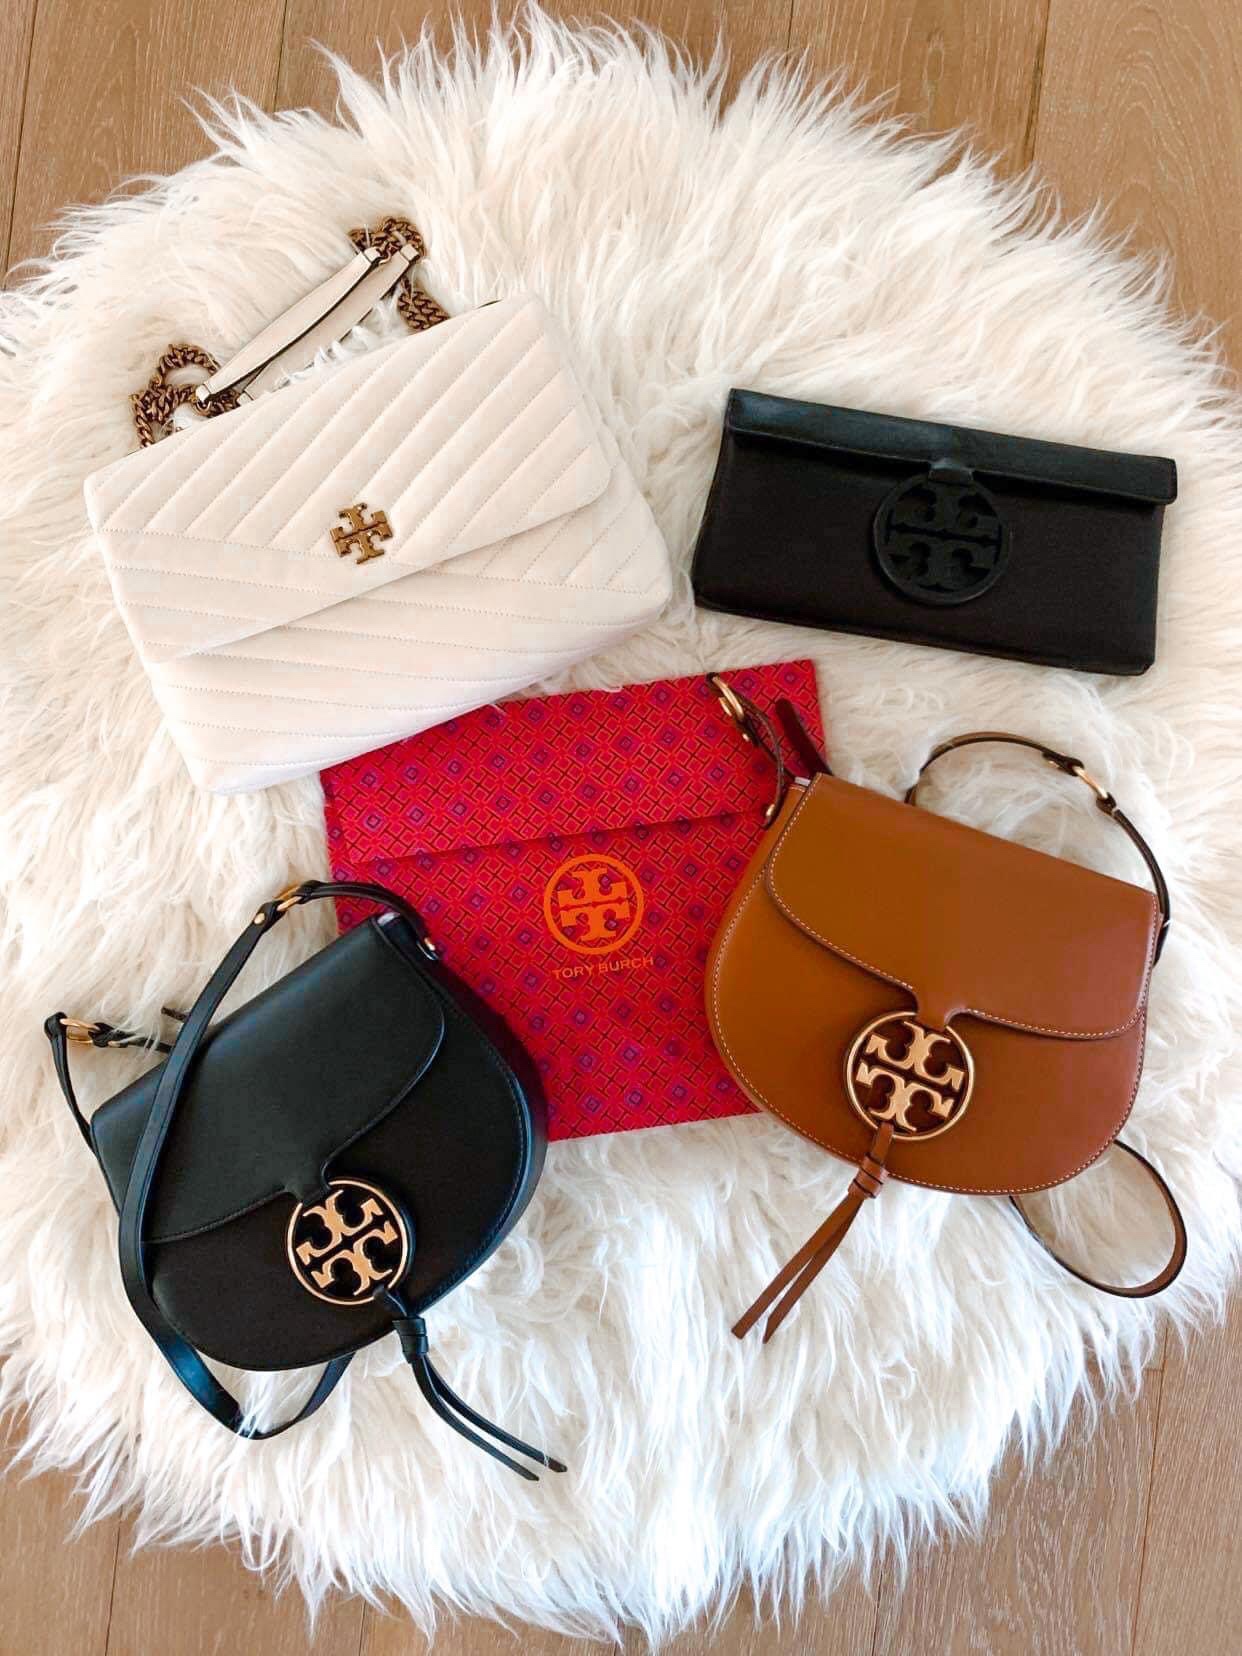 Tory Burch Private Sale 2021: Best Handbags and Shoes for 70% Off